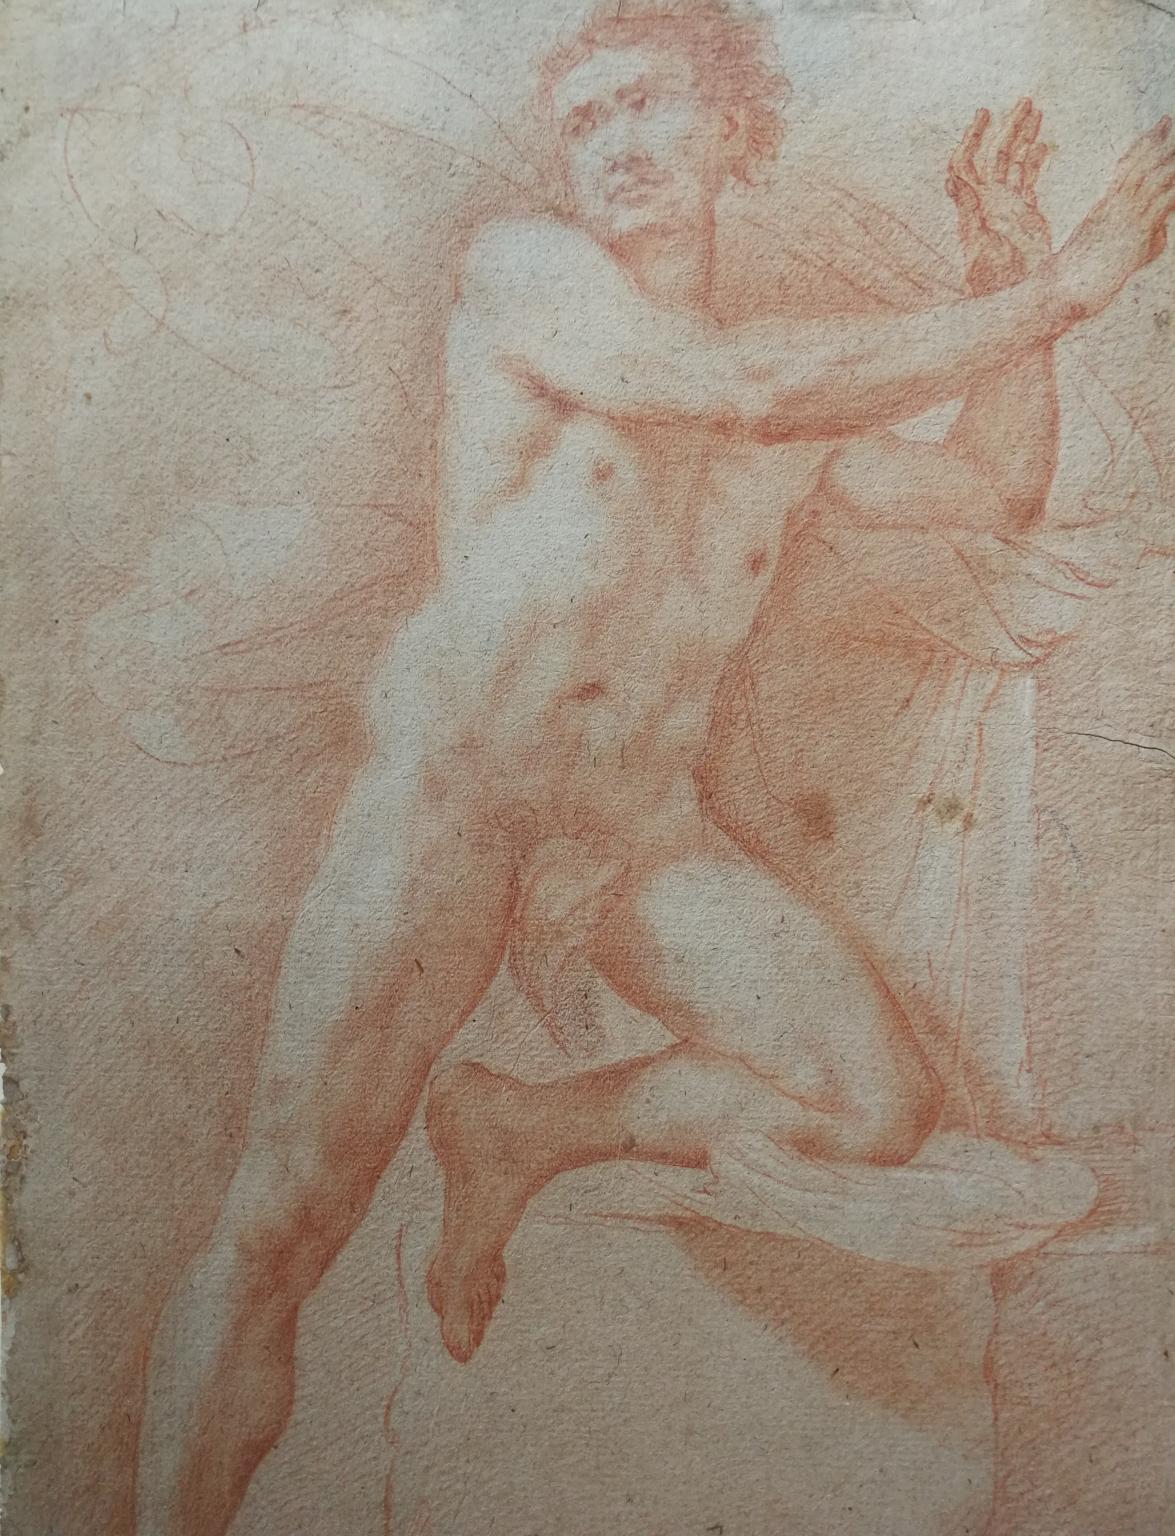 17th Century Nude Drawings and Watercolors